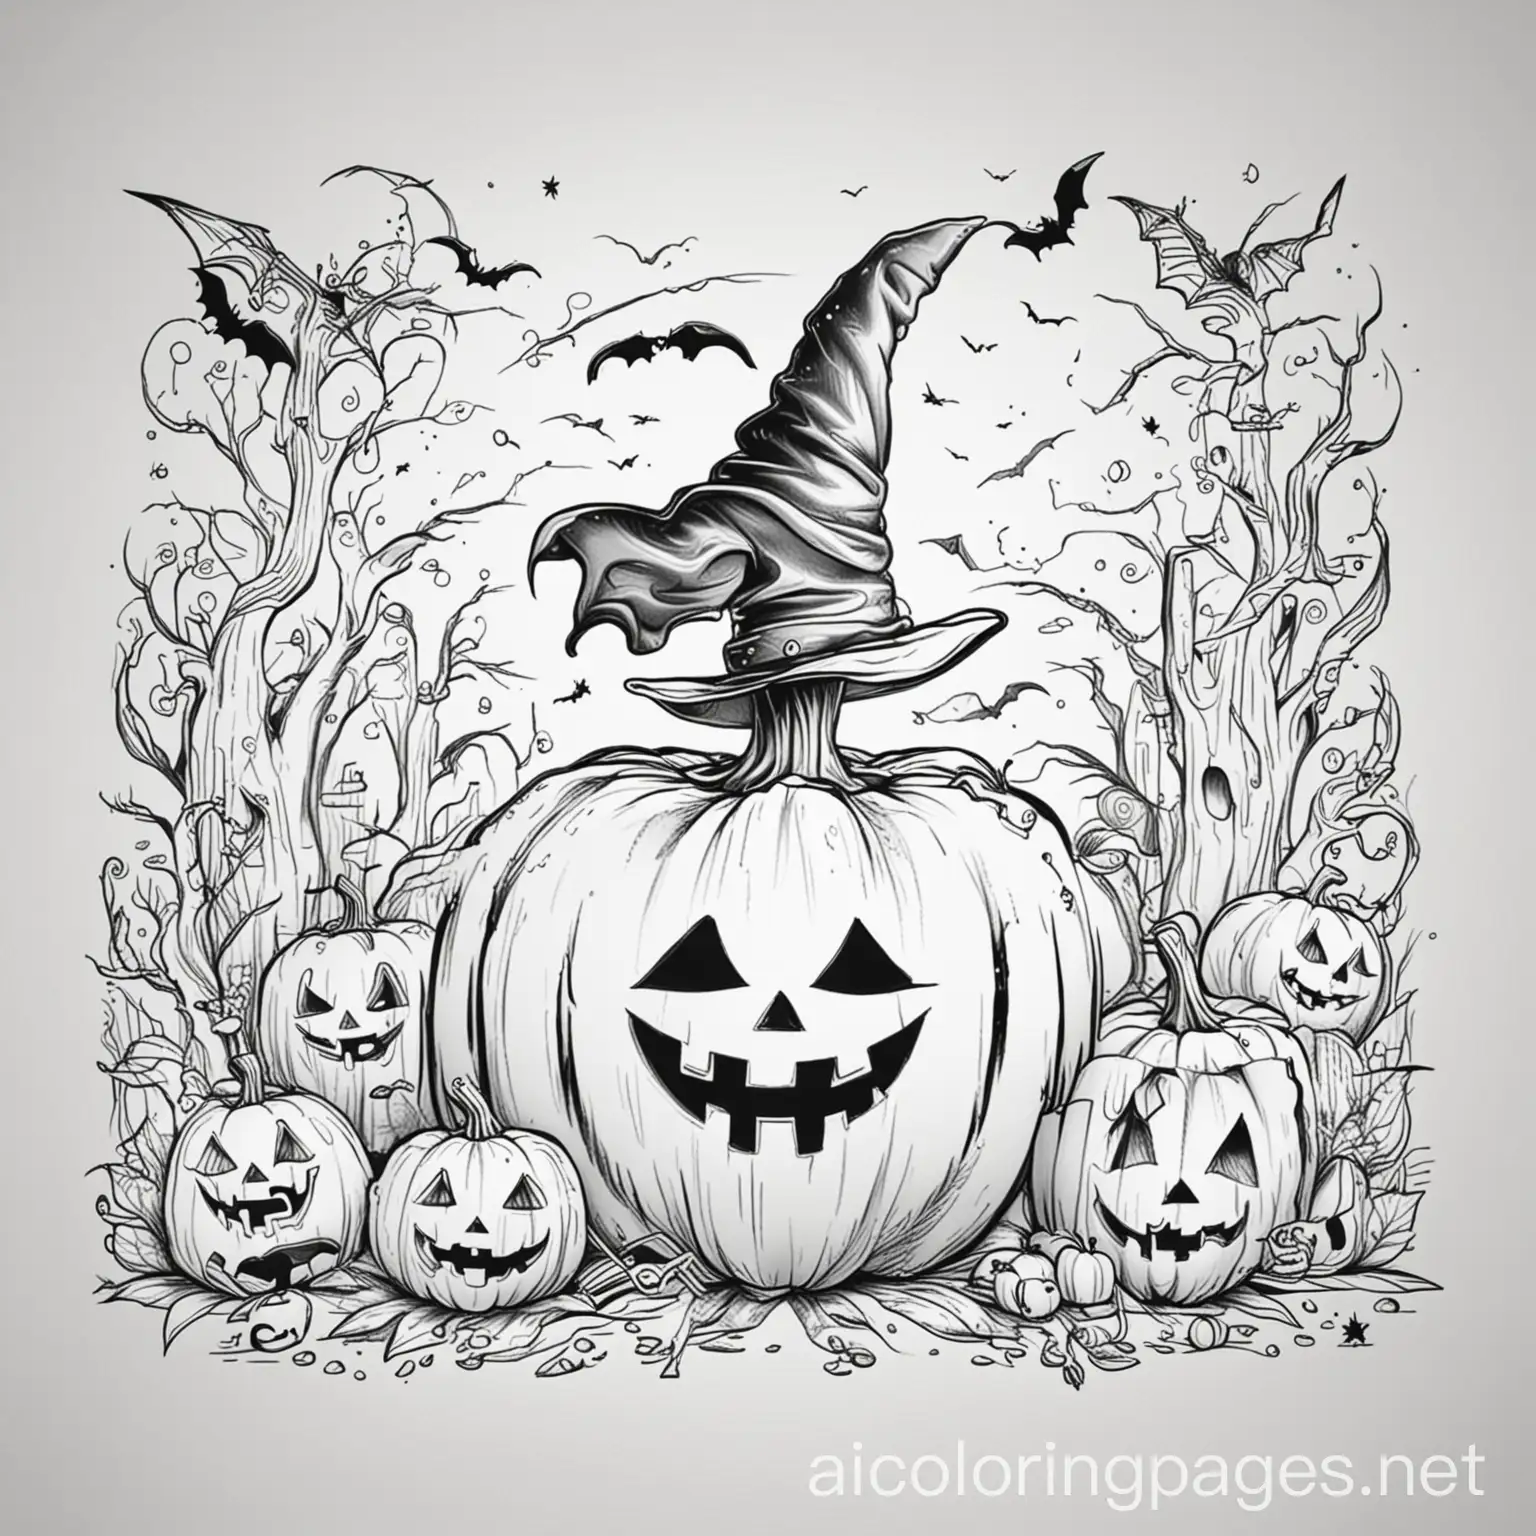 Happy-Halloween-Black-and-White-Coloring-Page-for-Simplicity-and-Ample-White-Space